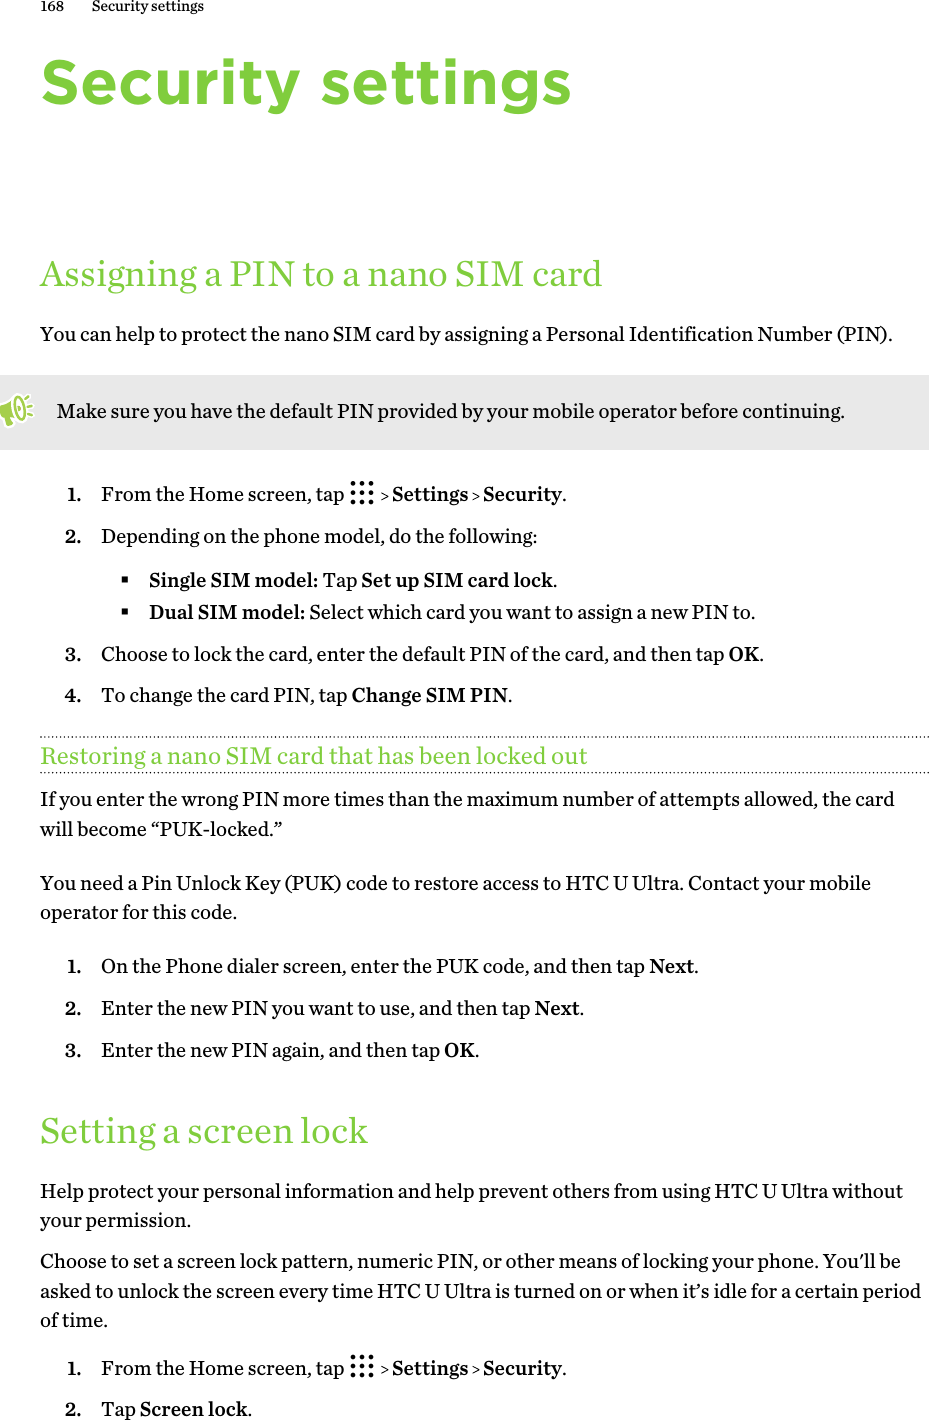 Security settingsAssigning a PIN to a nano SIM cardYou can help to protect the nano SIM card by assigning a Personal Identification Number (PIN).Make sure you have the default PIN provided by your mobile operator before continuing.1. From the Home screen, tap     Settings   Security.2. Depending on the phone model, do the following:§Single SIM model: Tap Set up SIM card lock.§Dual SIM model: Select which card you want to assign a new PIN to.3. Choose to lock the card, enter the default PIN of the card, and then tap OK.4. To change the card PIN, tap Change SIM PIN.Restoring a nano SIM card that has been locked outIf you enter the wrong PIN more times than the maximum number of attempts allowed, the cardwill become “PUK-locked.”You need a Pin Unlock Key (PUK) code to restore access to HTC U Ultra. Contact your mobileoperator for this code.1. On the Phone dialer screen, enter the PUK code, and then tap Next.2. Enter the new PIN you want to use, and then tap Next.3. Enter the new PIN again, and then tap OK.Setting a screen lockHelp protect your personal information and help prevent others from using HTC U Ultra withoutyour permission.Choose to set a screen lock pattern, numeric PIN, or other means of locking your phone. You&apos;ll beasked to unlock the screen every time HTC U Ultra is turned on or when it’s idle for a certain periodof time.1. From the Home screen, tap     Settings   Security.2. Tap Screen lock.168 Security settings